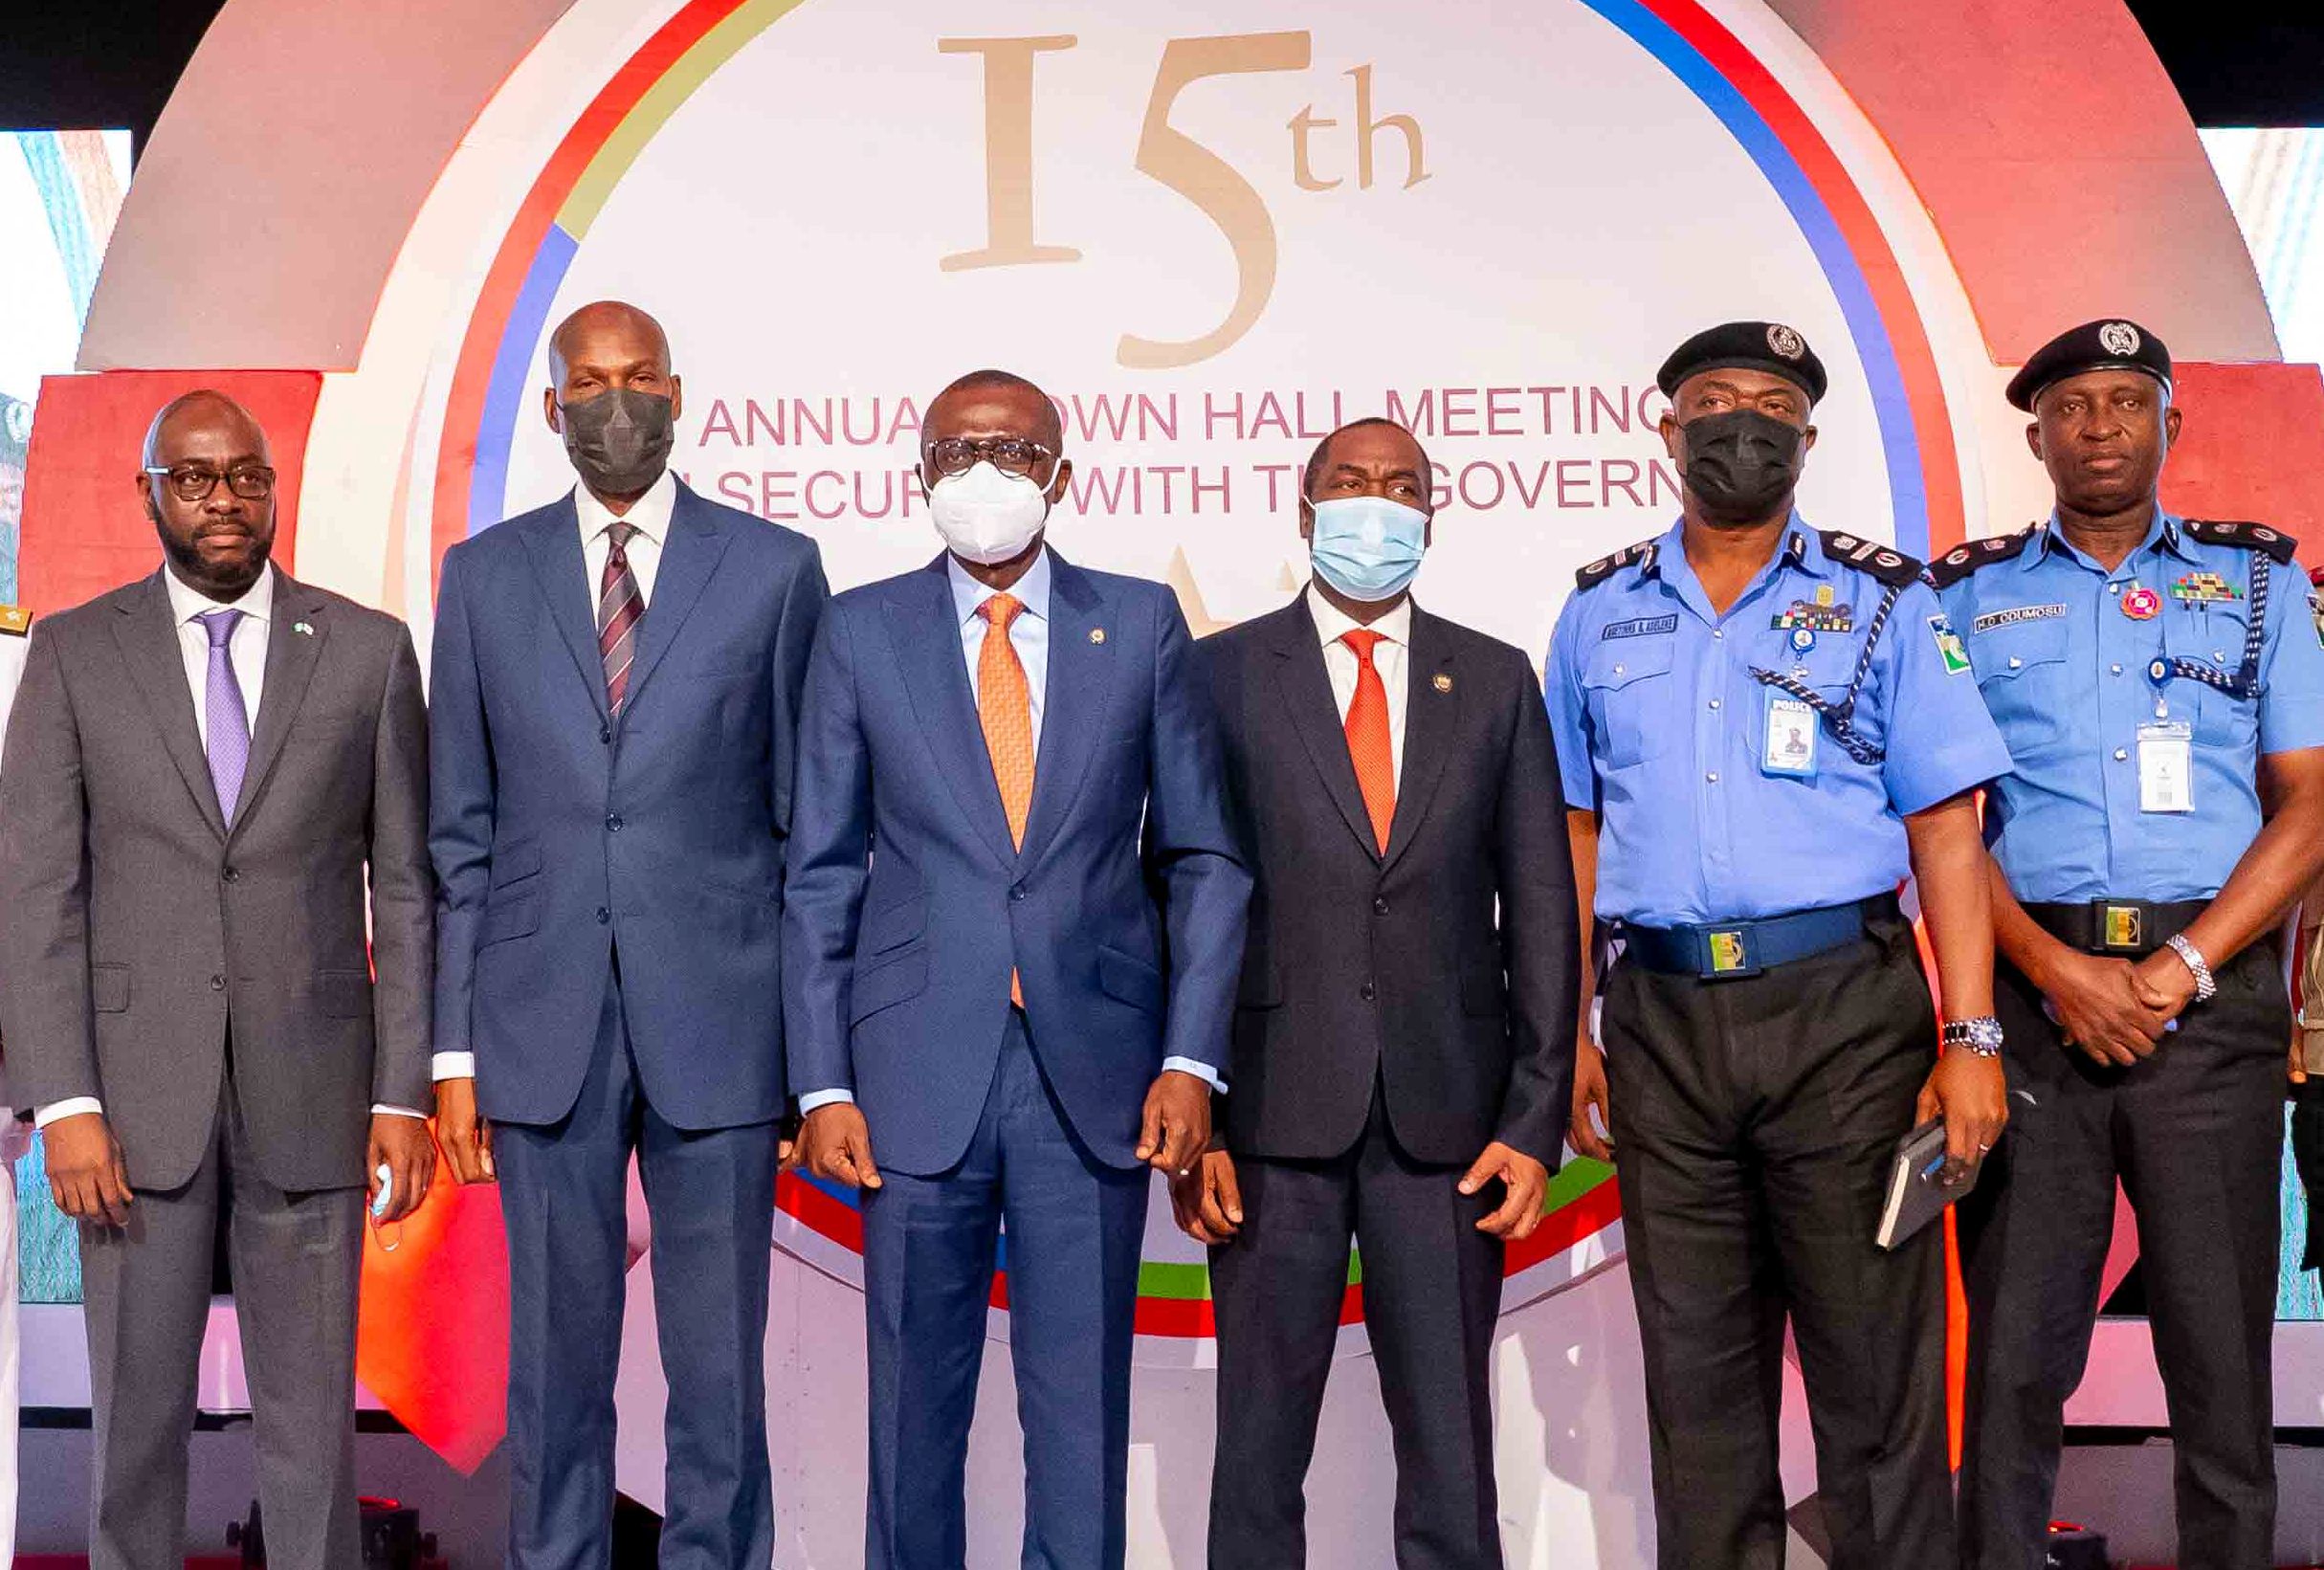 Photos: Gov. Sanwo-Olu At The 15th Annual Town Hall Meeting On Security At Civic Centre, V.I, On Wednesday, Dec. 22, 2021